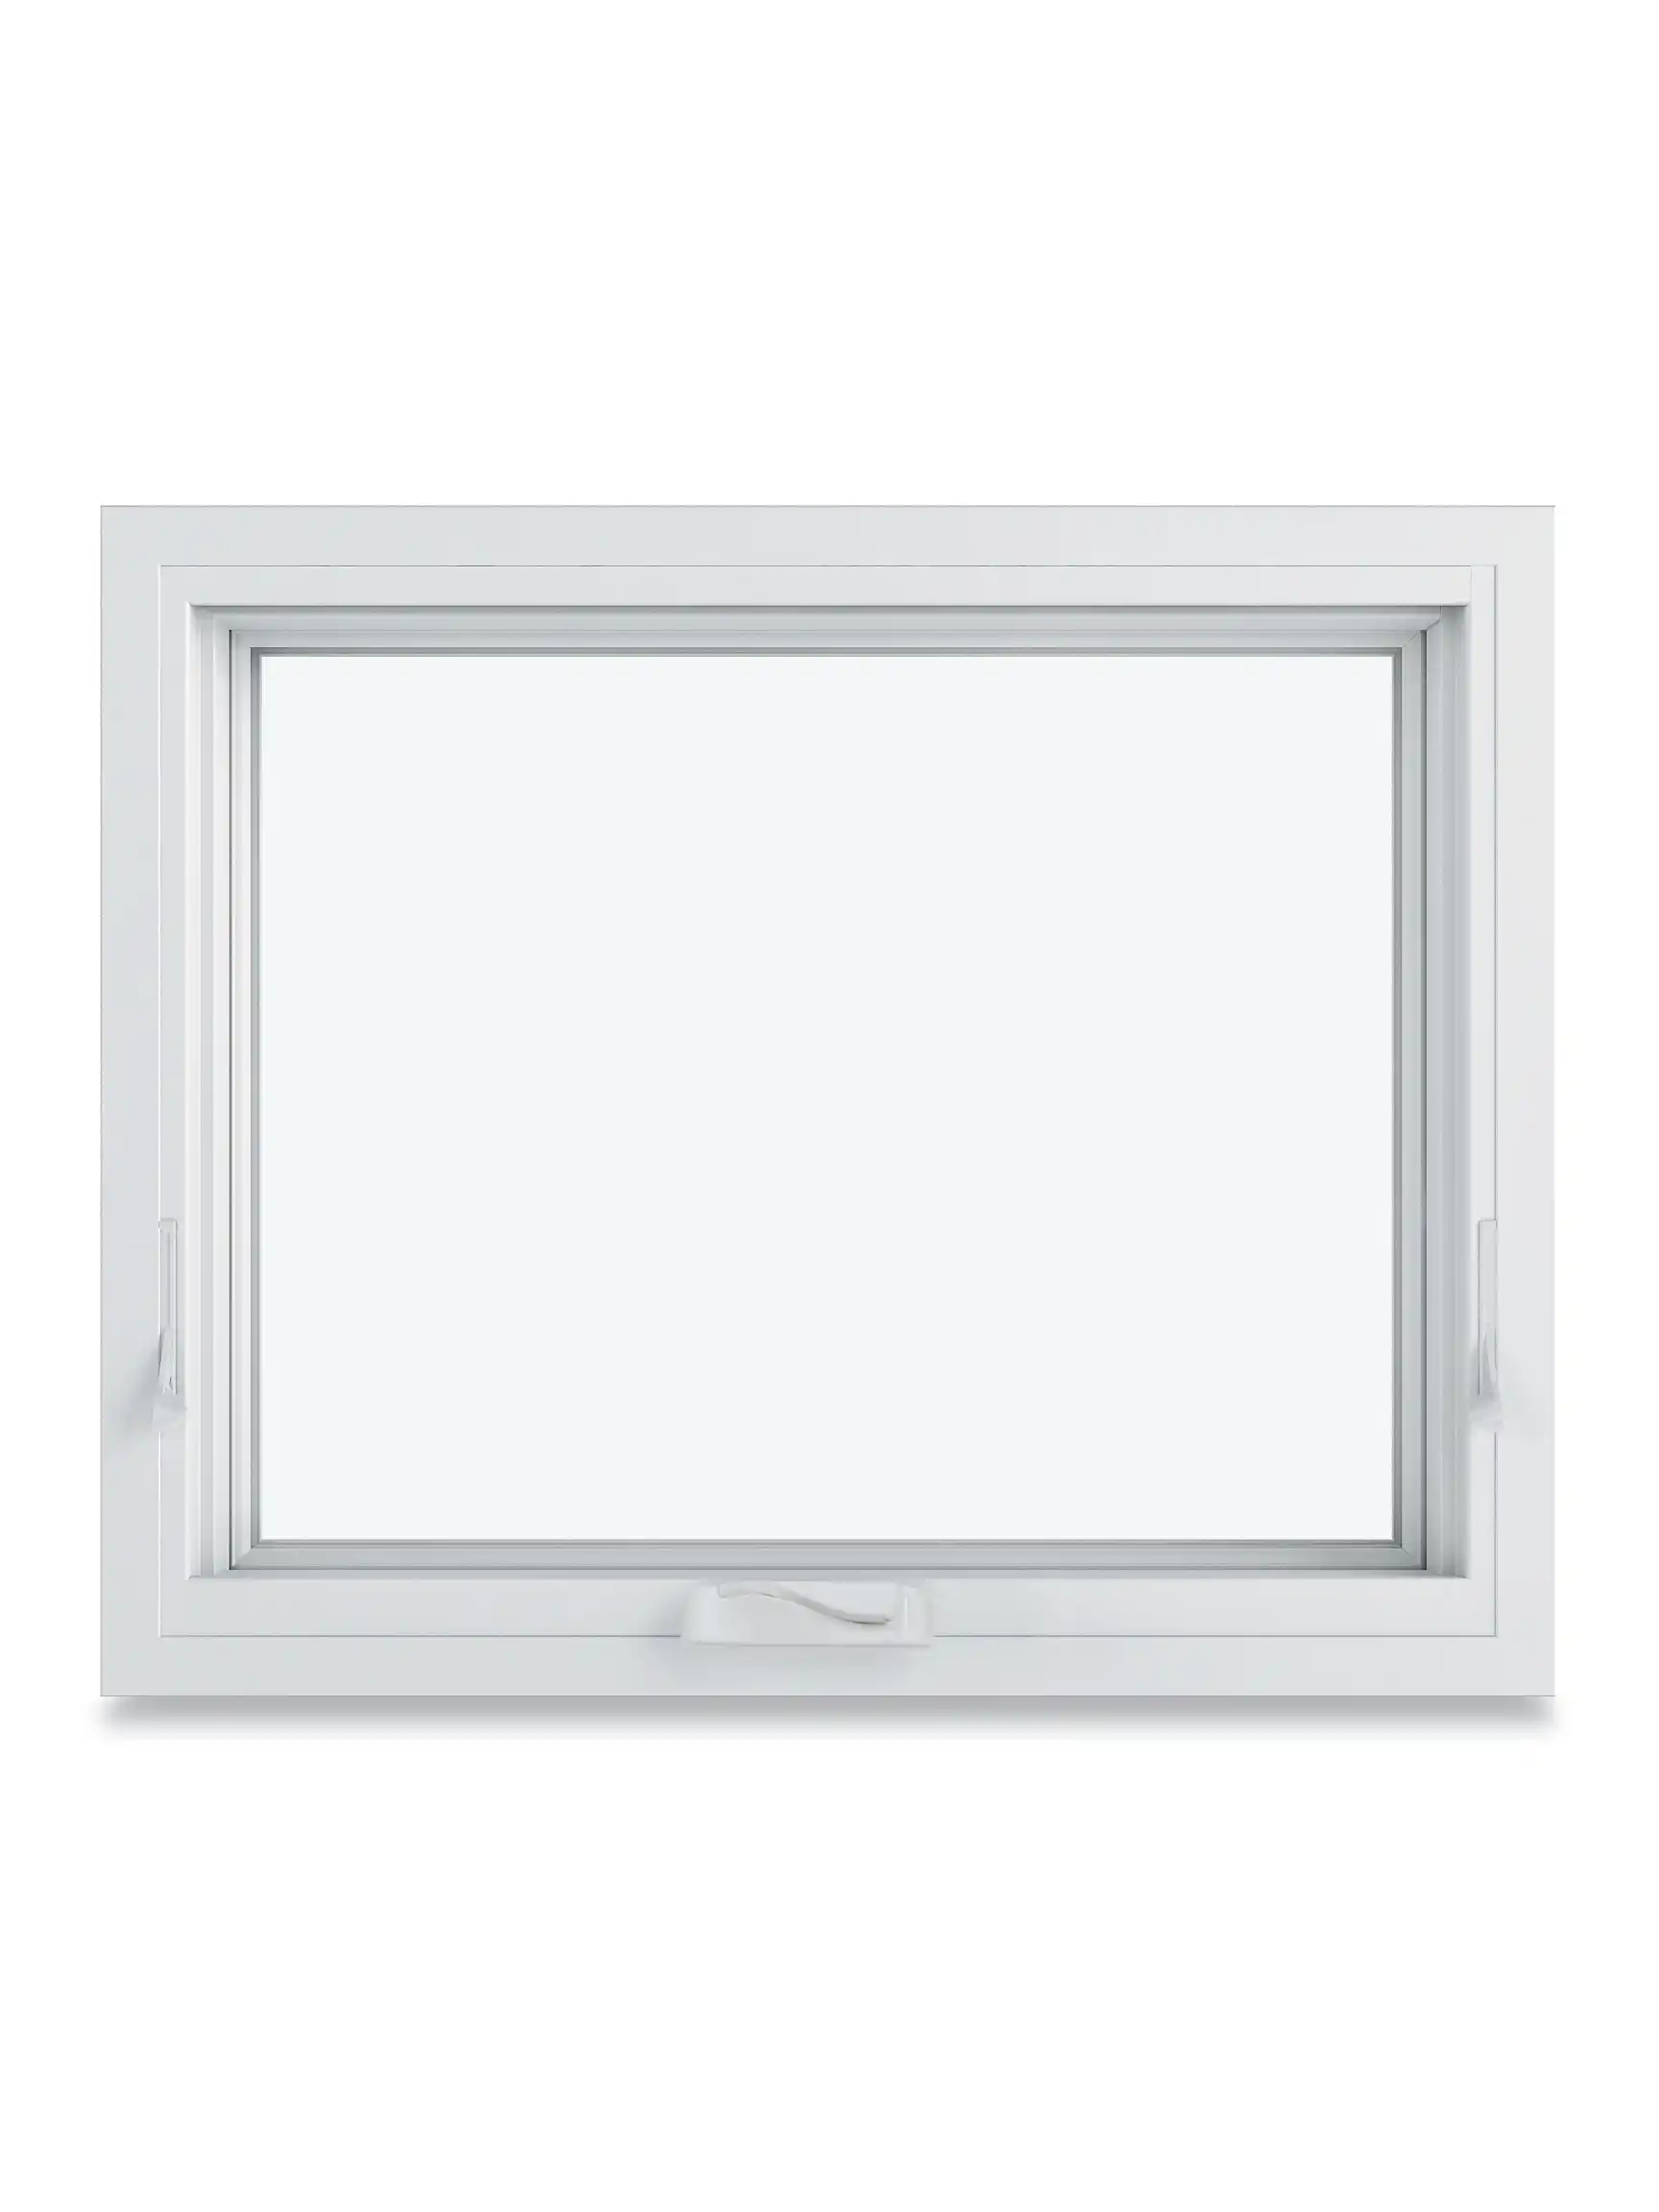 Image of a standard white Marvin Replacement Awning window.